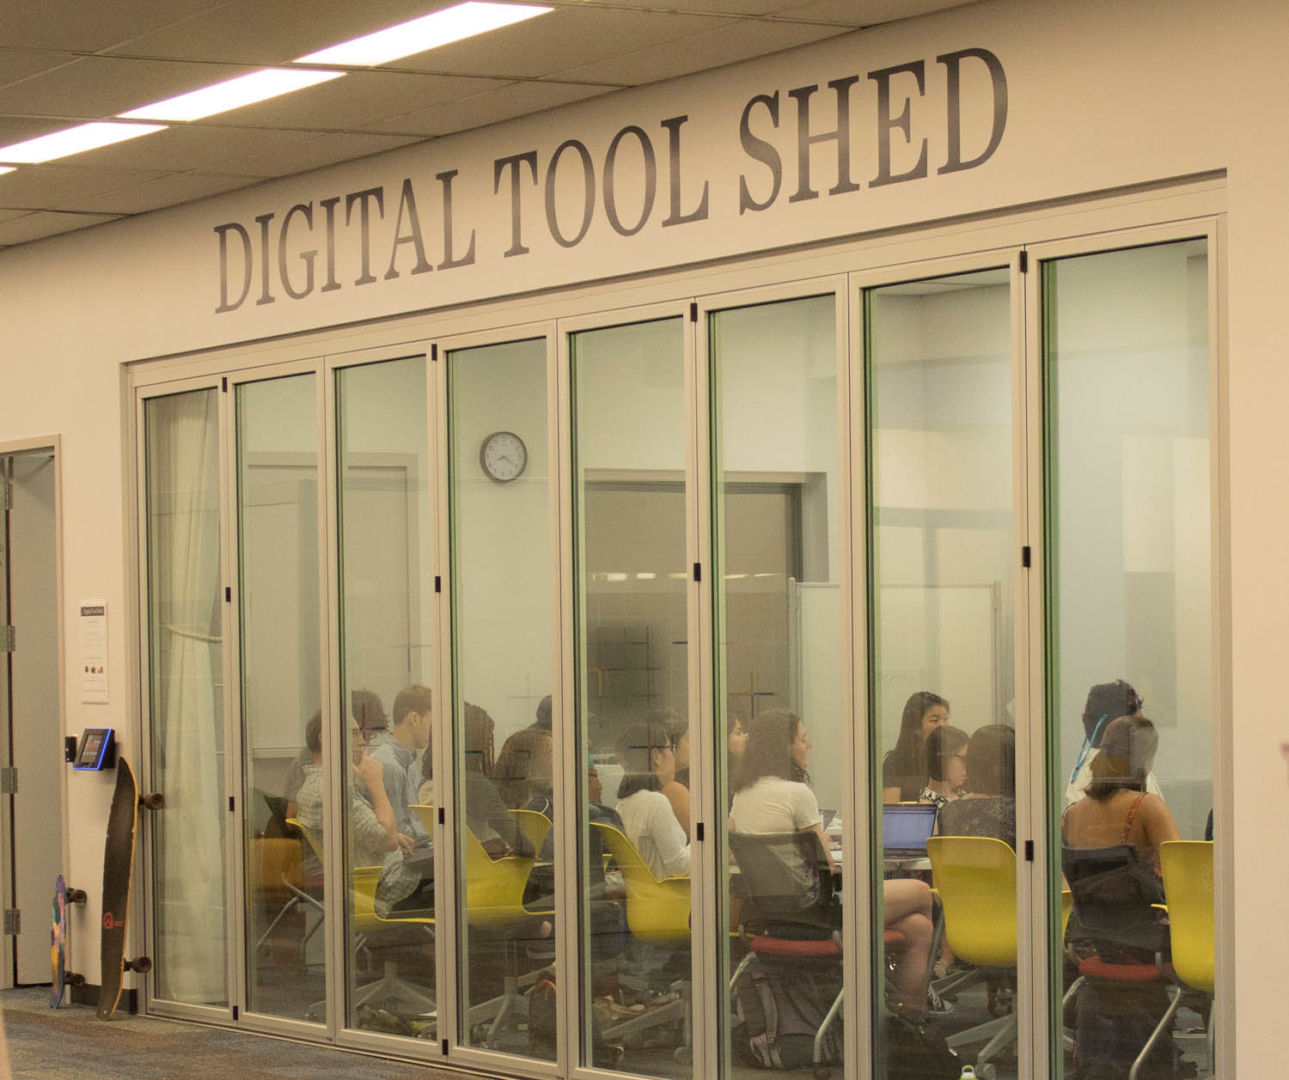 A class in the digital tool shed at the library